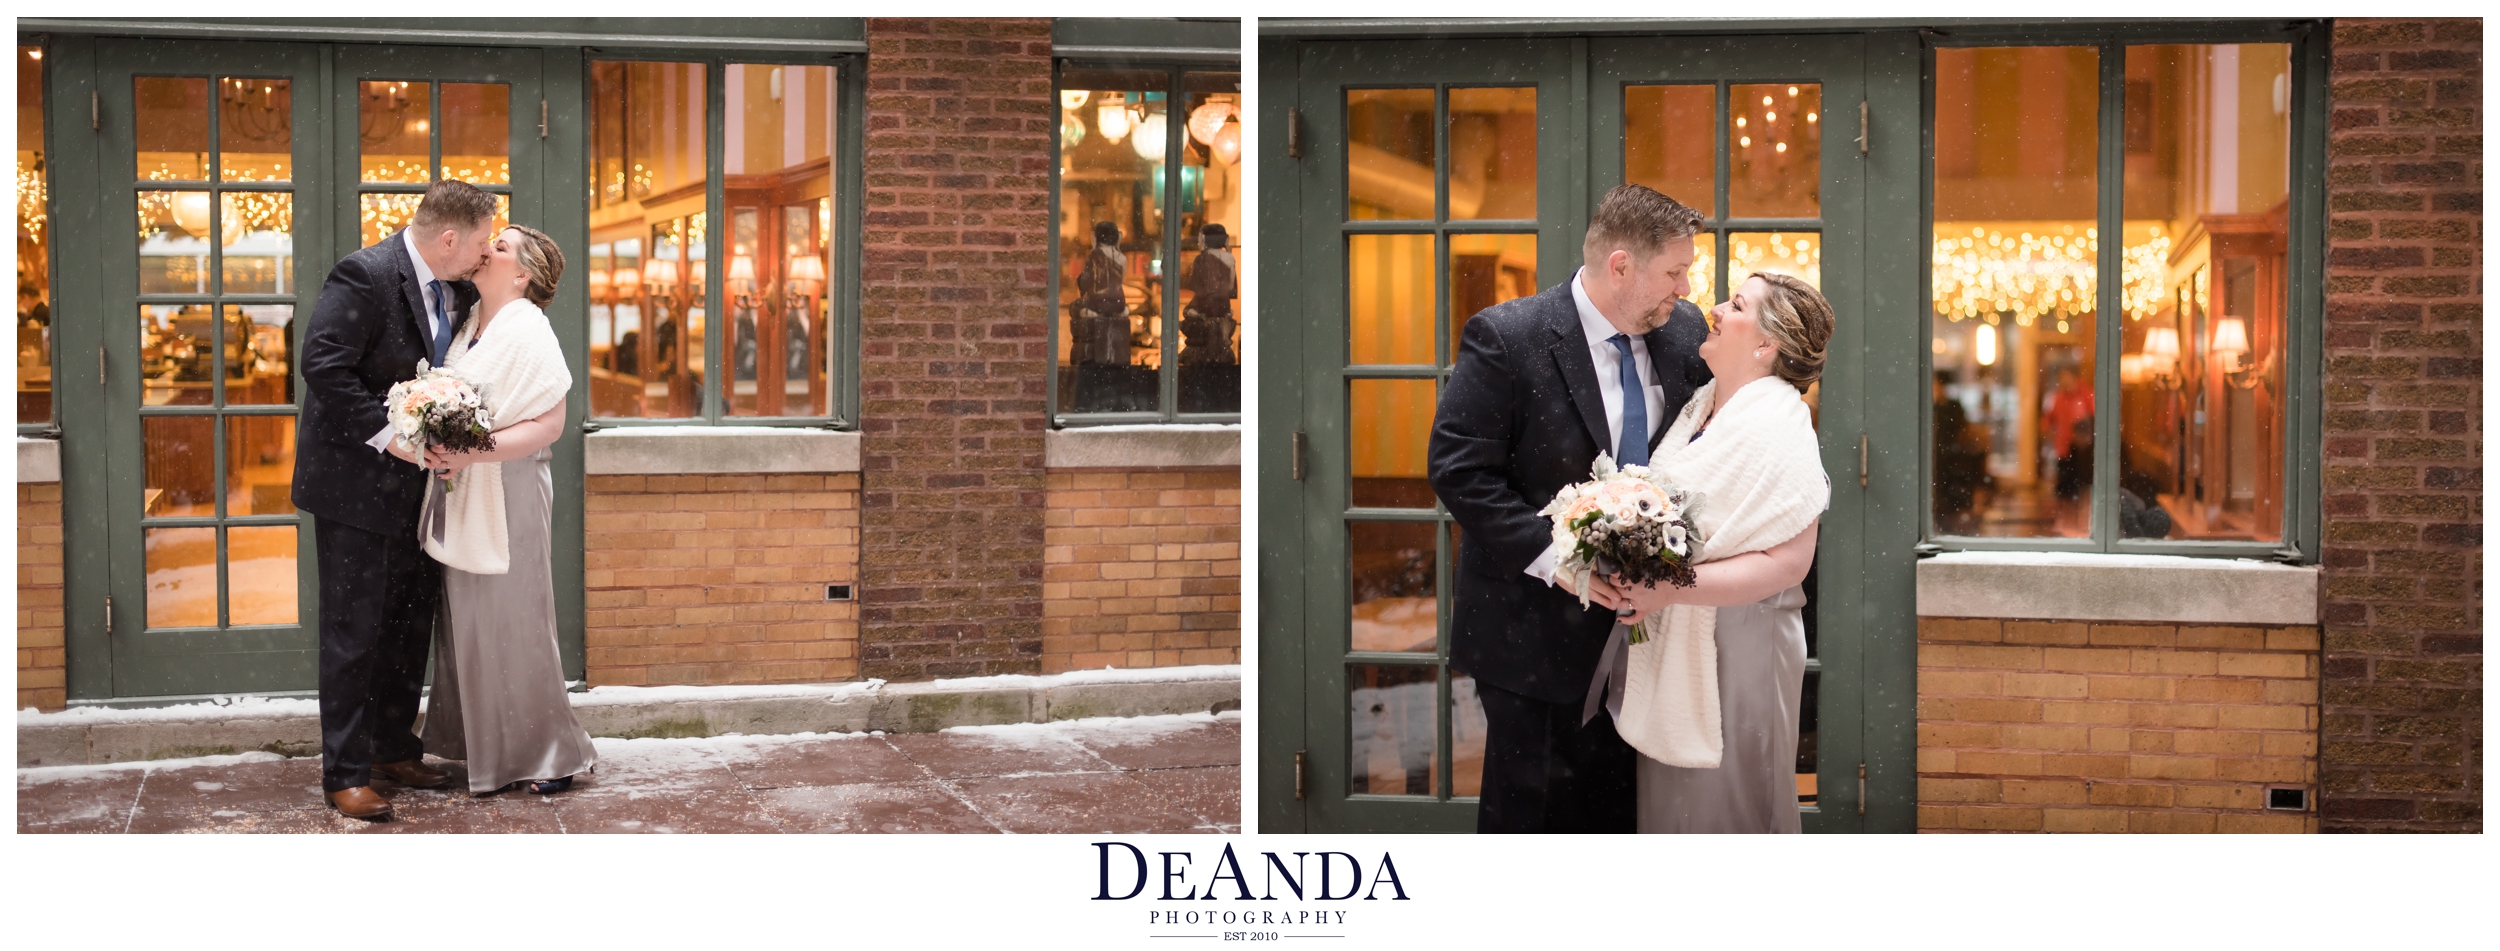 snowing portraits of bride and groom in ivy room courtyard 